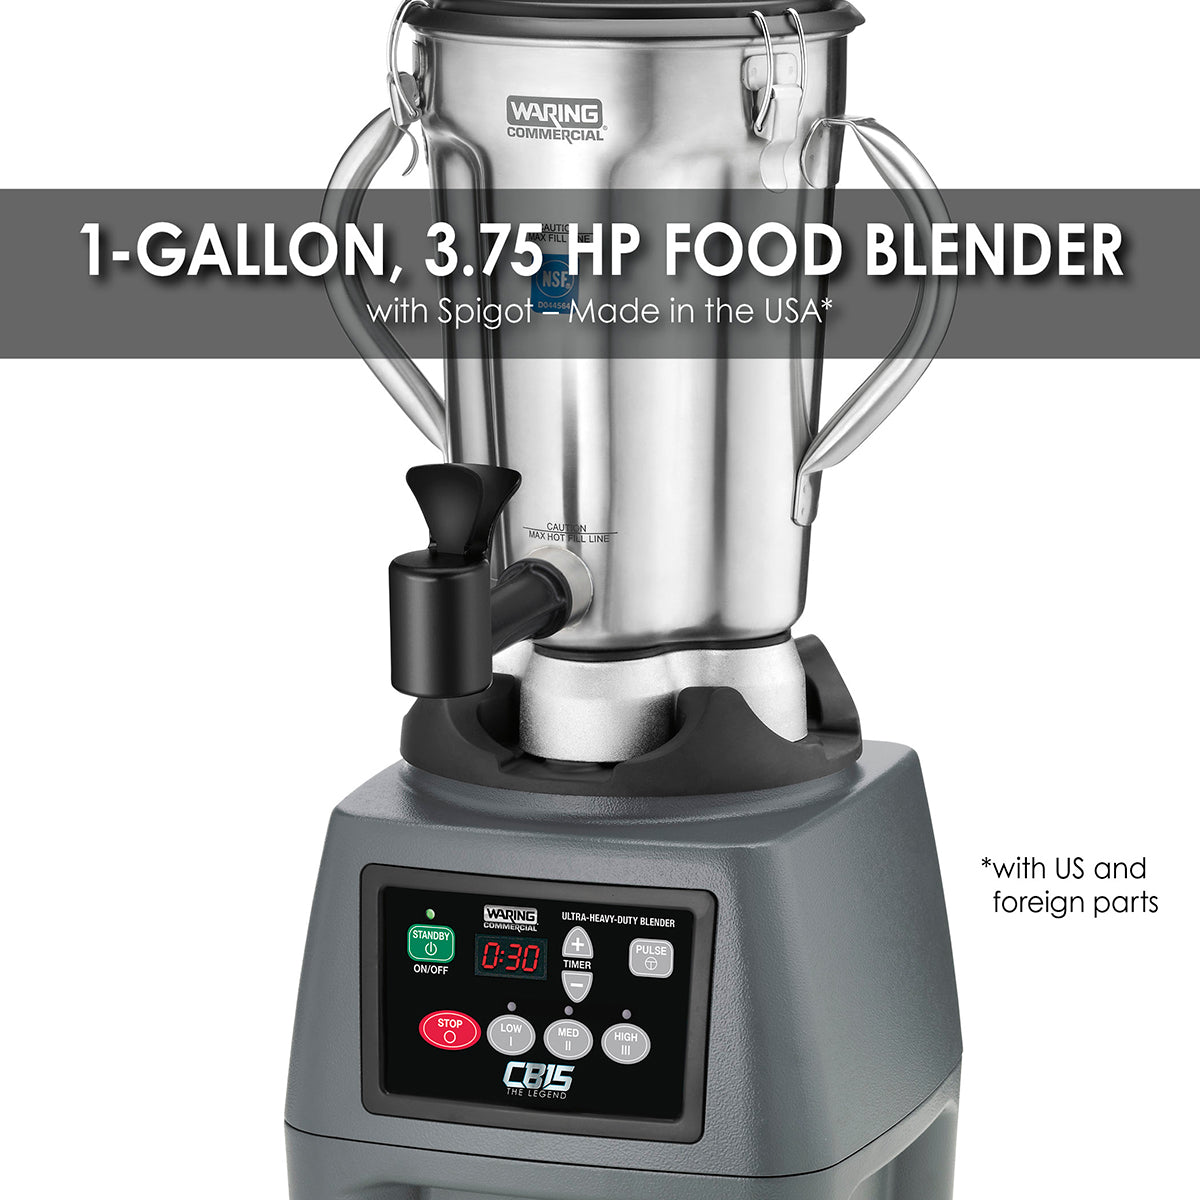 Waring ONE-GALLON 3.75 HP FOOD BLENDER WITH SPIGOT AND TIMER FUNCTION – MADE IN THE USA*  Model: CB15TSF